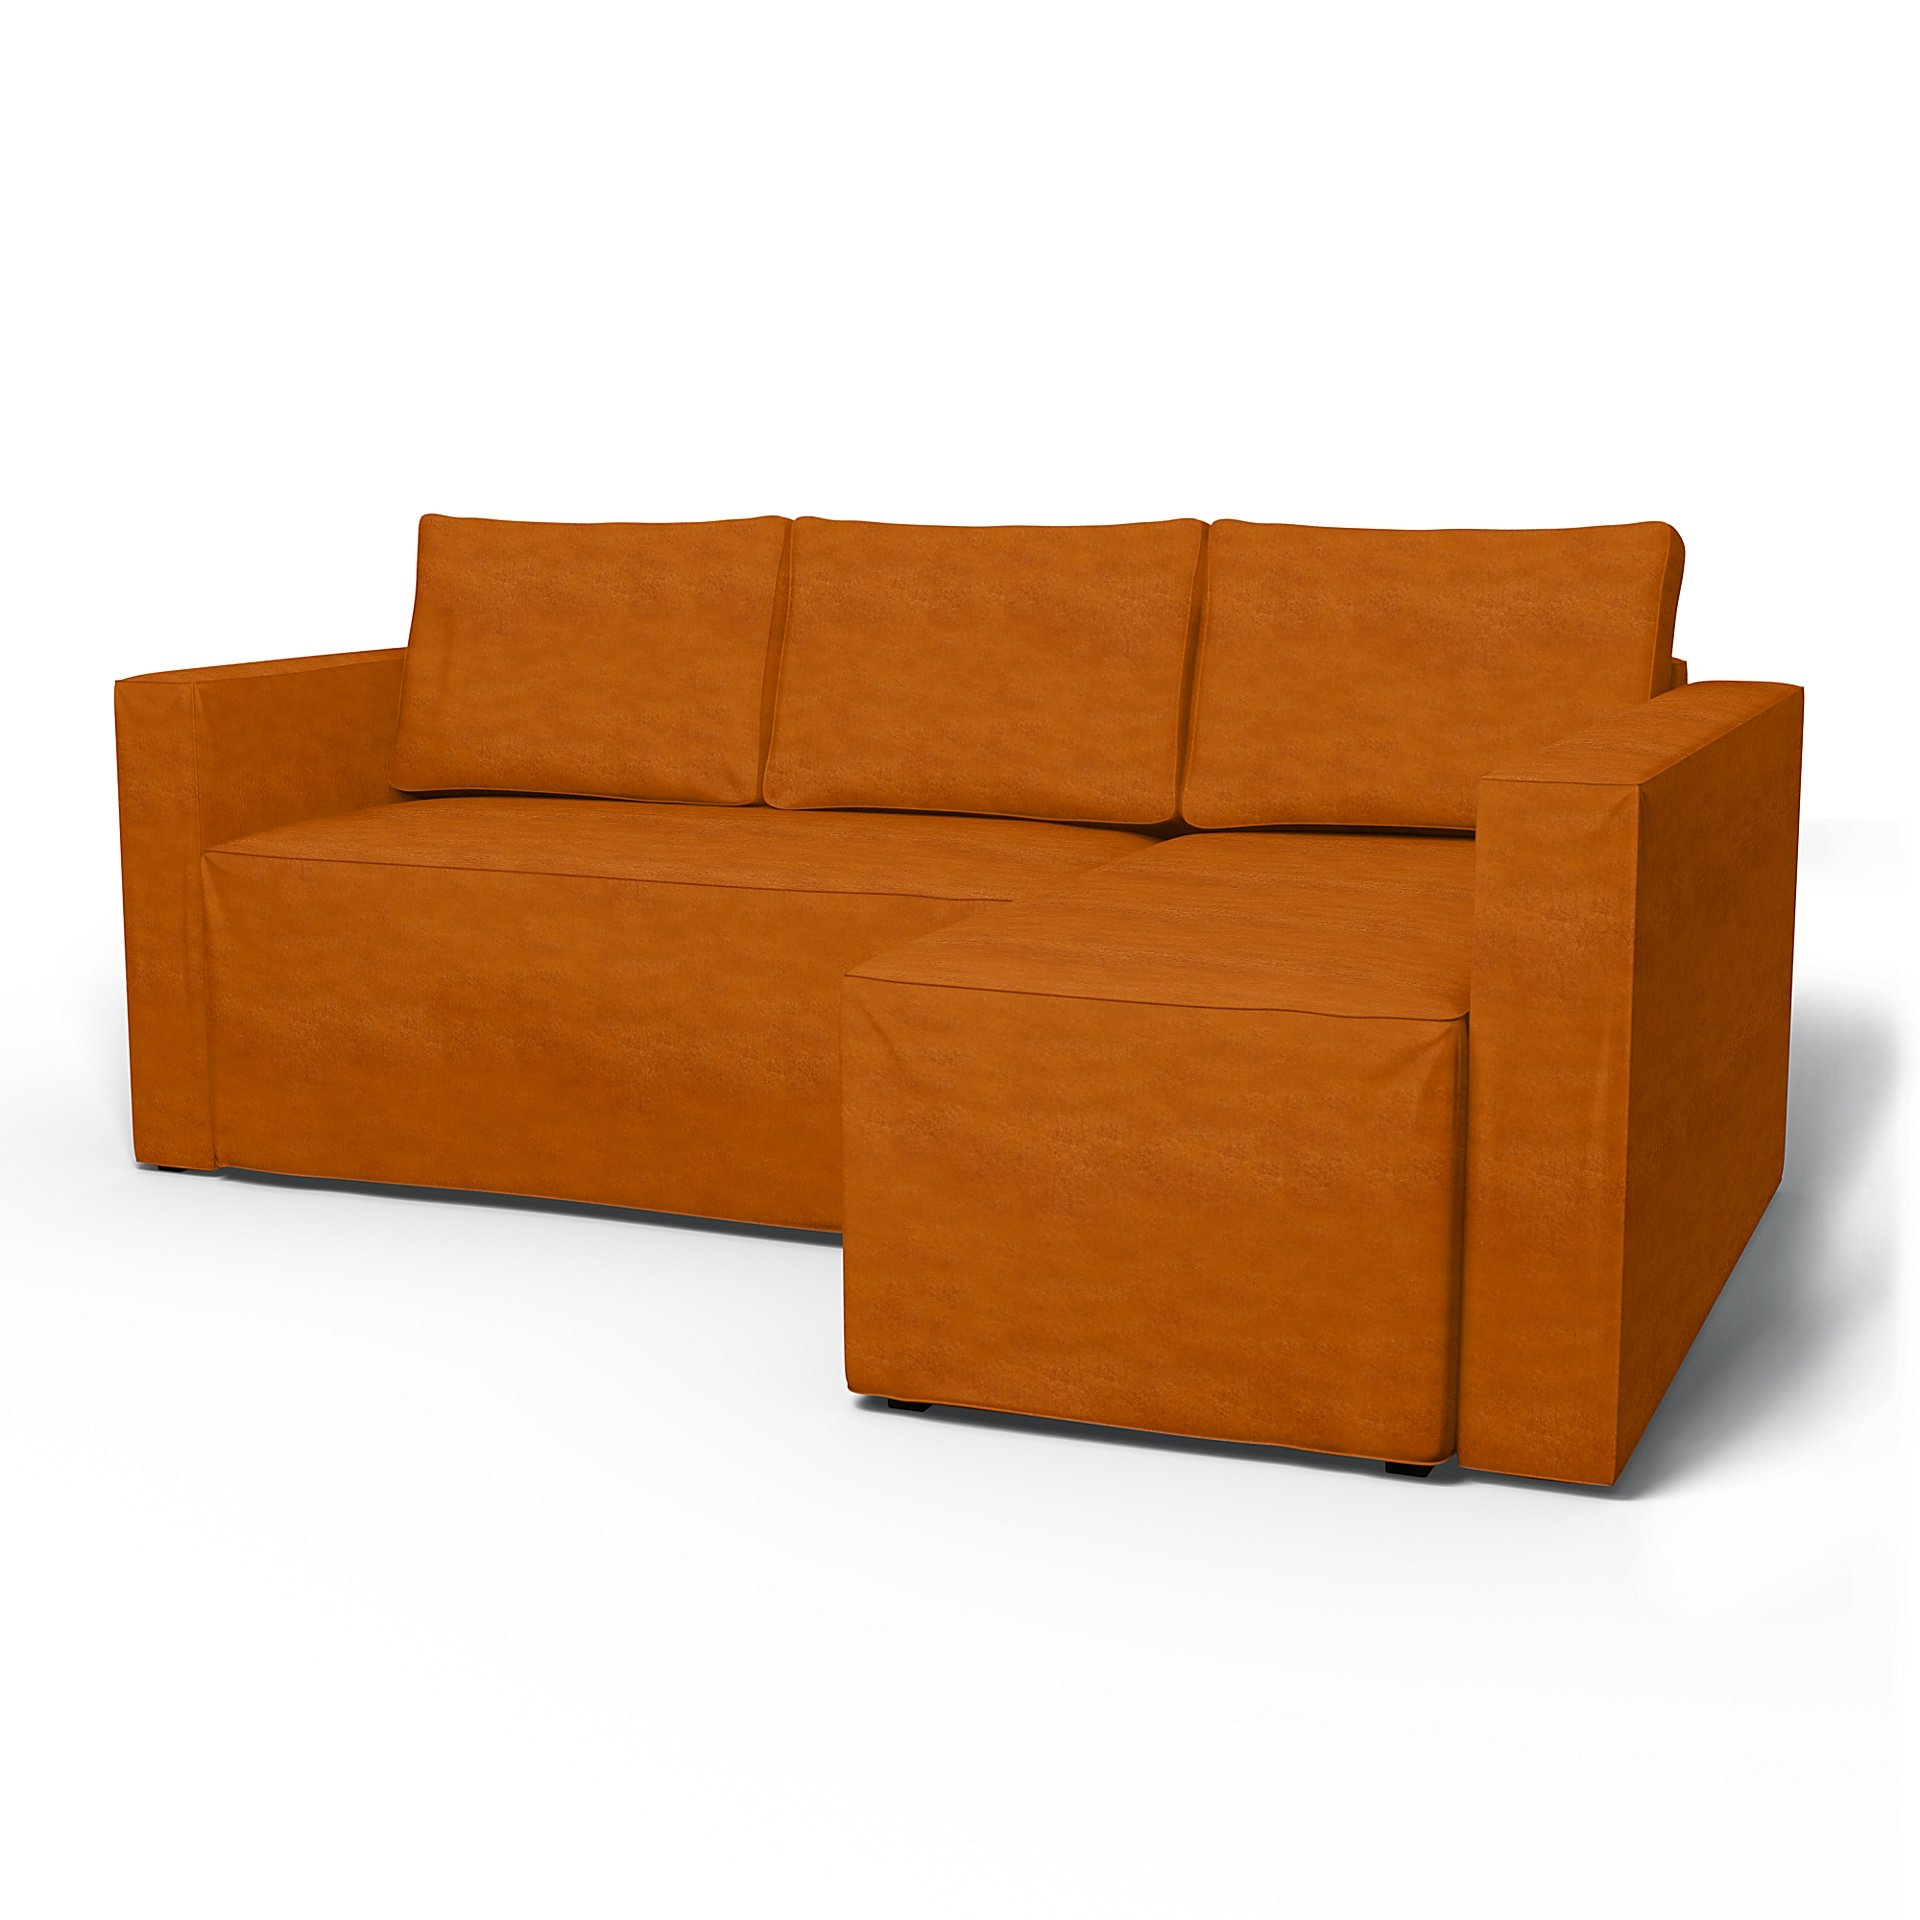 IKEA - Manstad Sofa Bed with Right Chaise Cover, Cognac, Velvet - Bemz